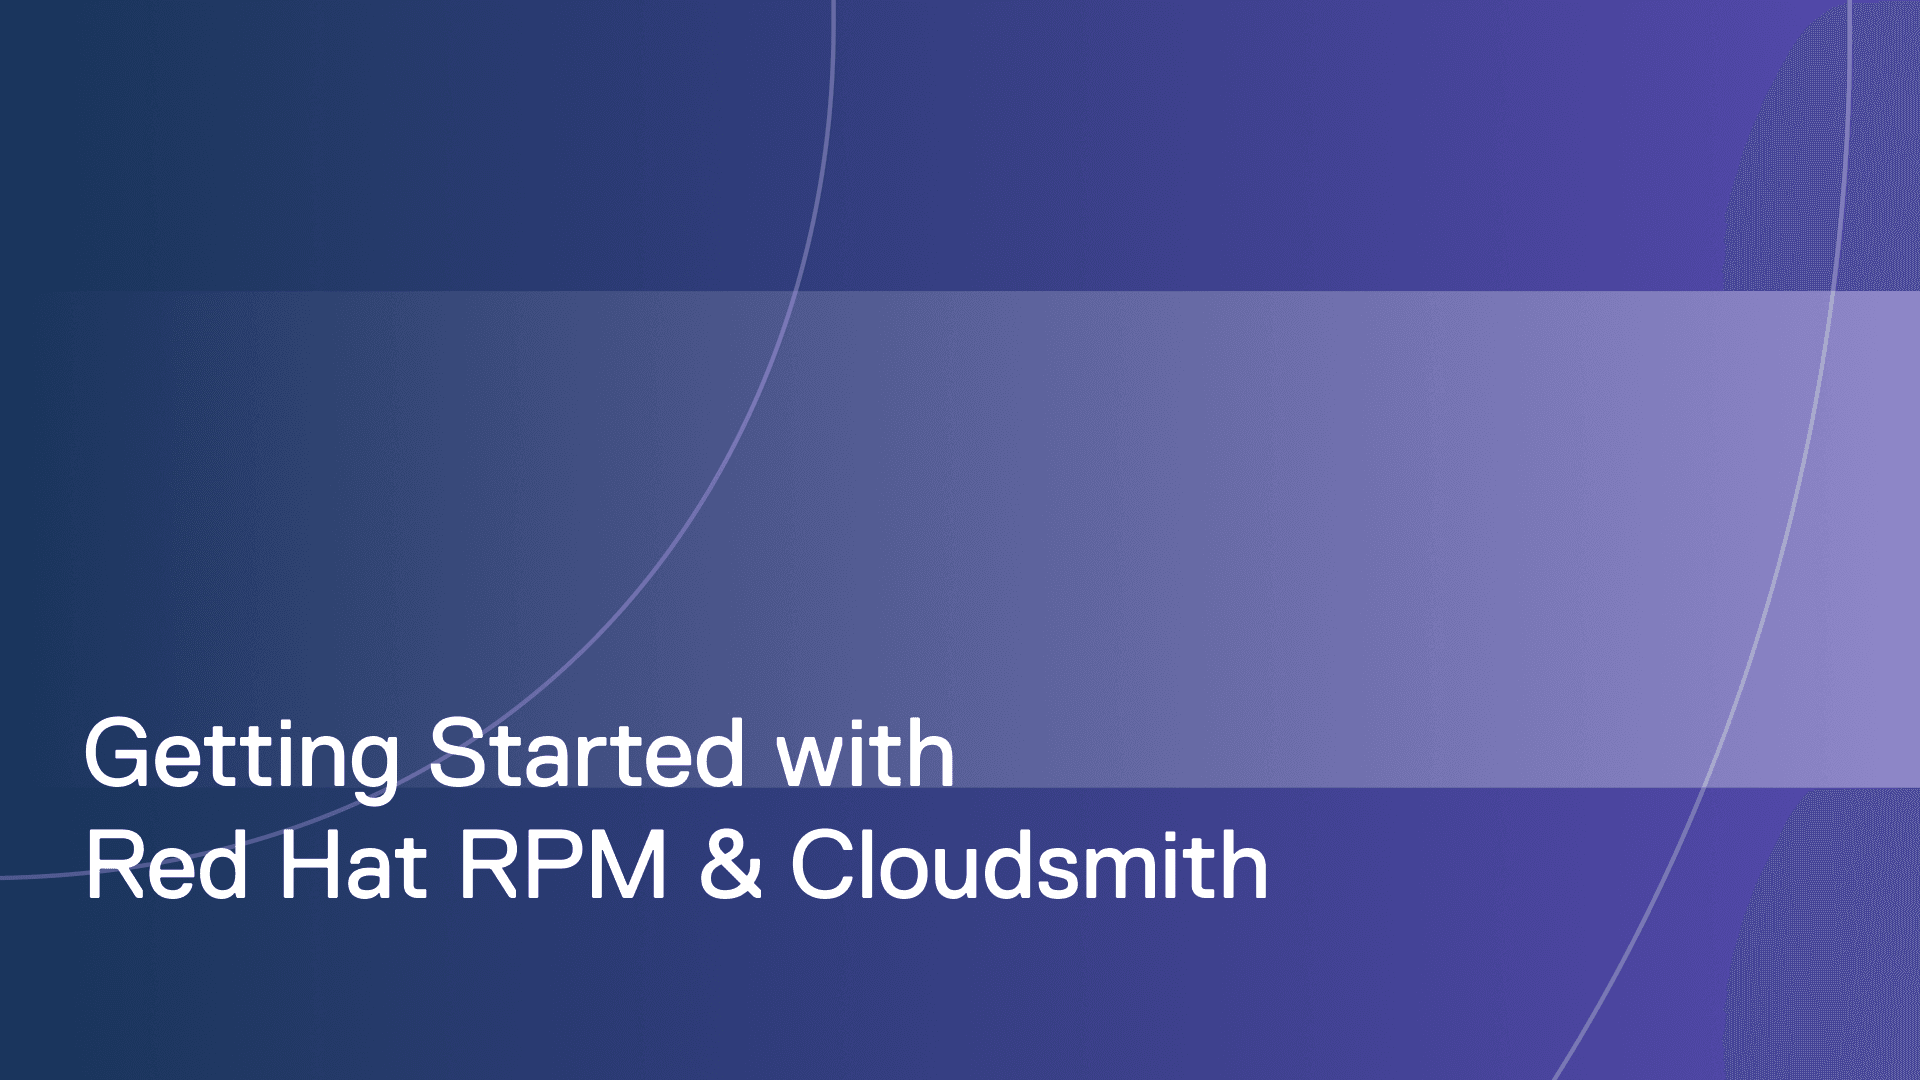 Getting started with Red Hat RPM and Cloudsmith